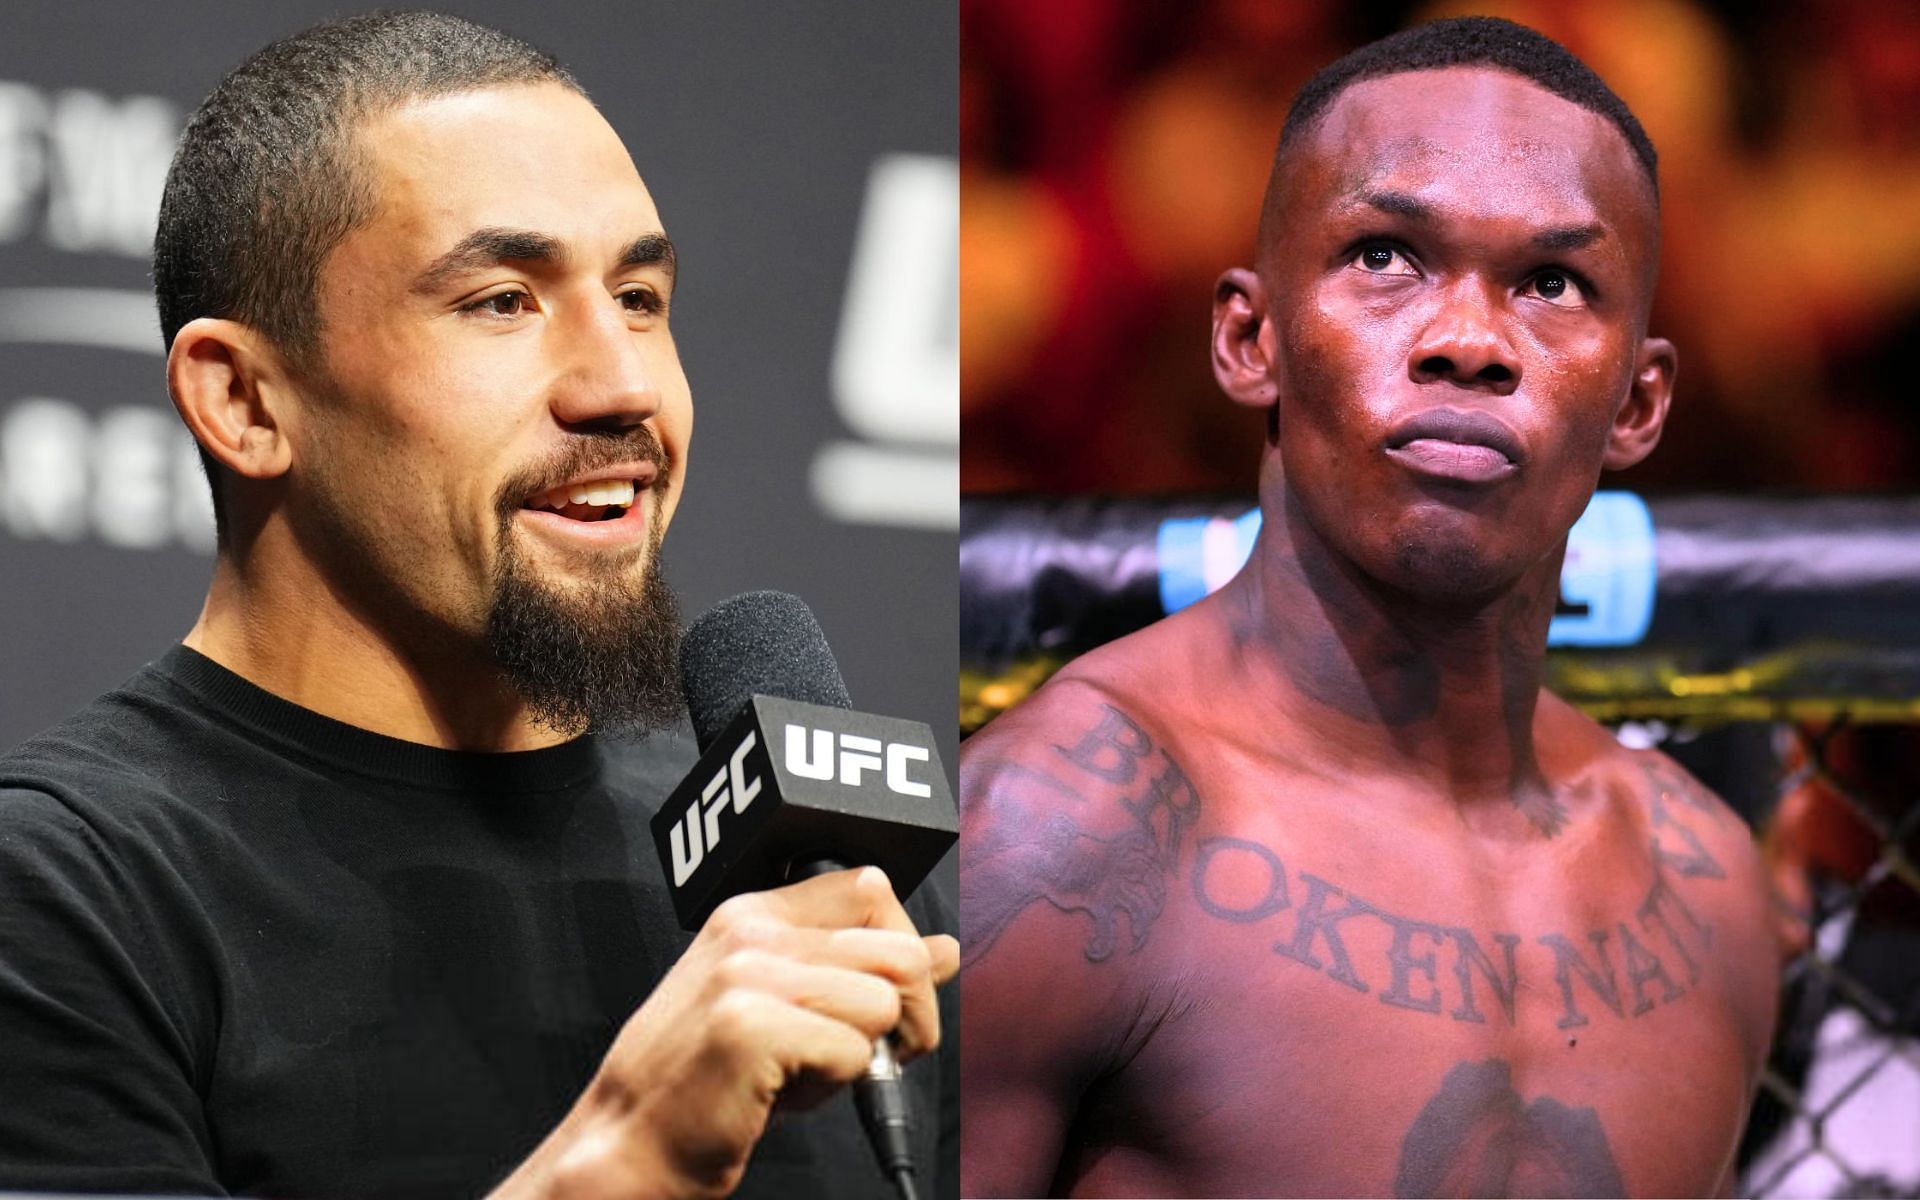 Robert Whittaker (left) and Israel Adesanya (right) [Images Courtesy: @GettyImages]